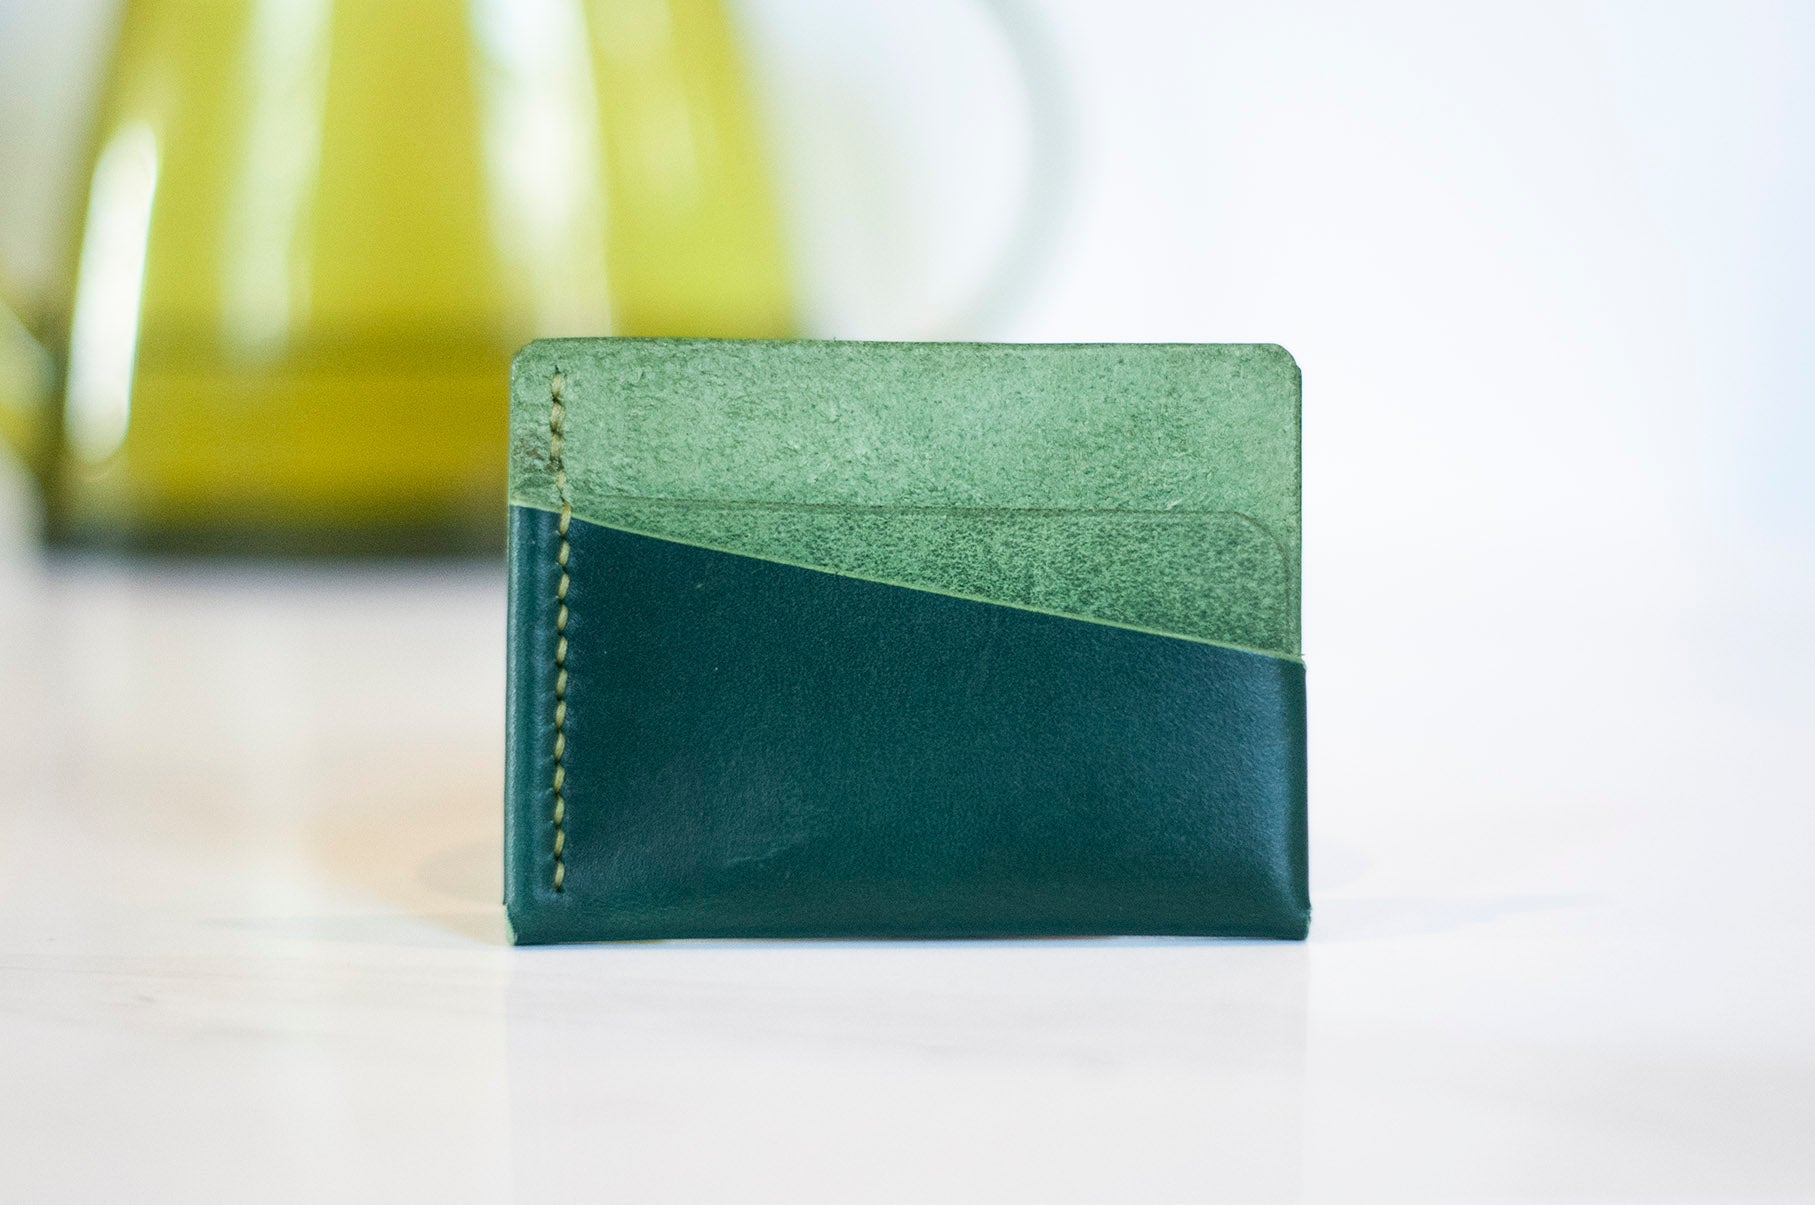 Green leather handmade wallet used as a front pocket wallet